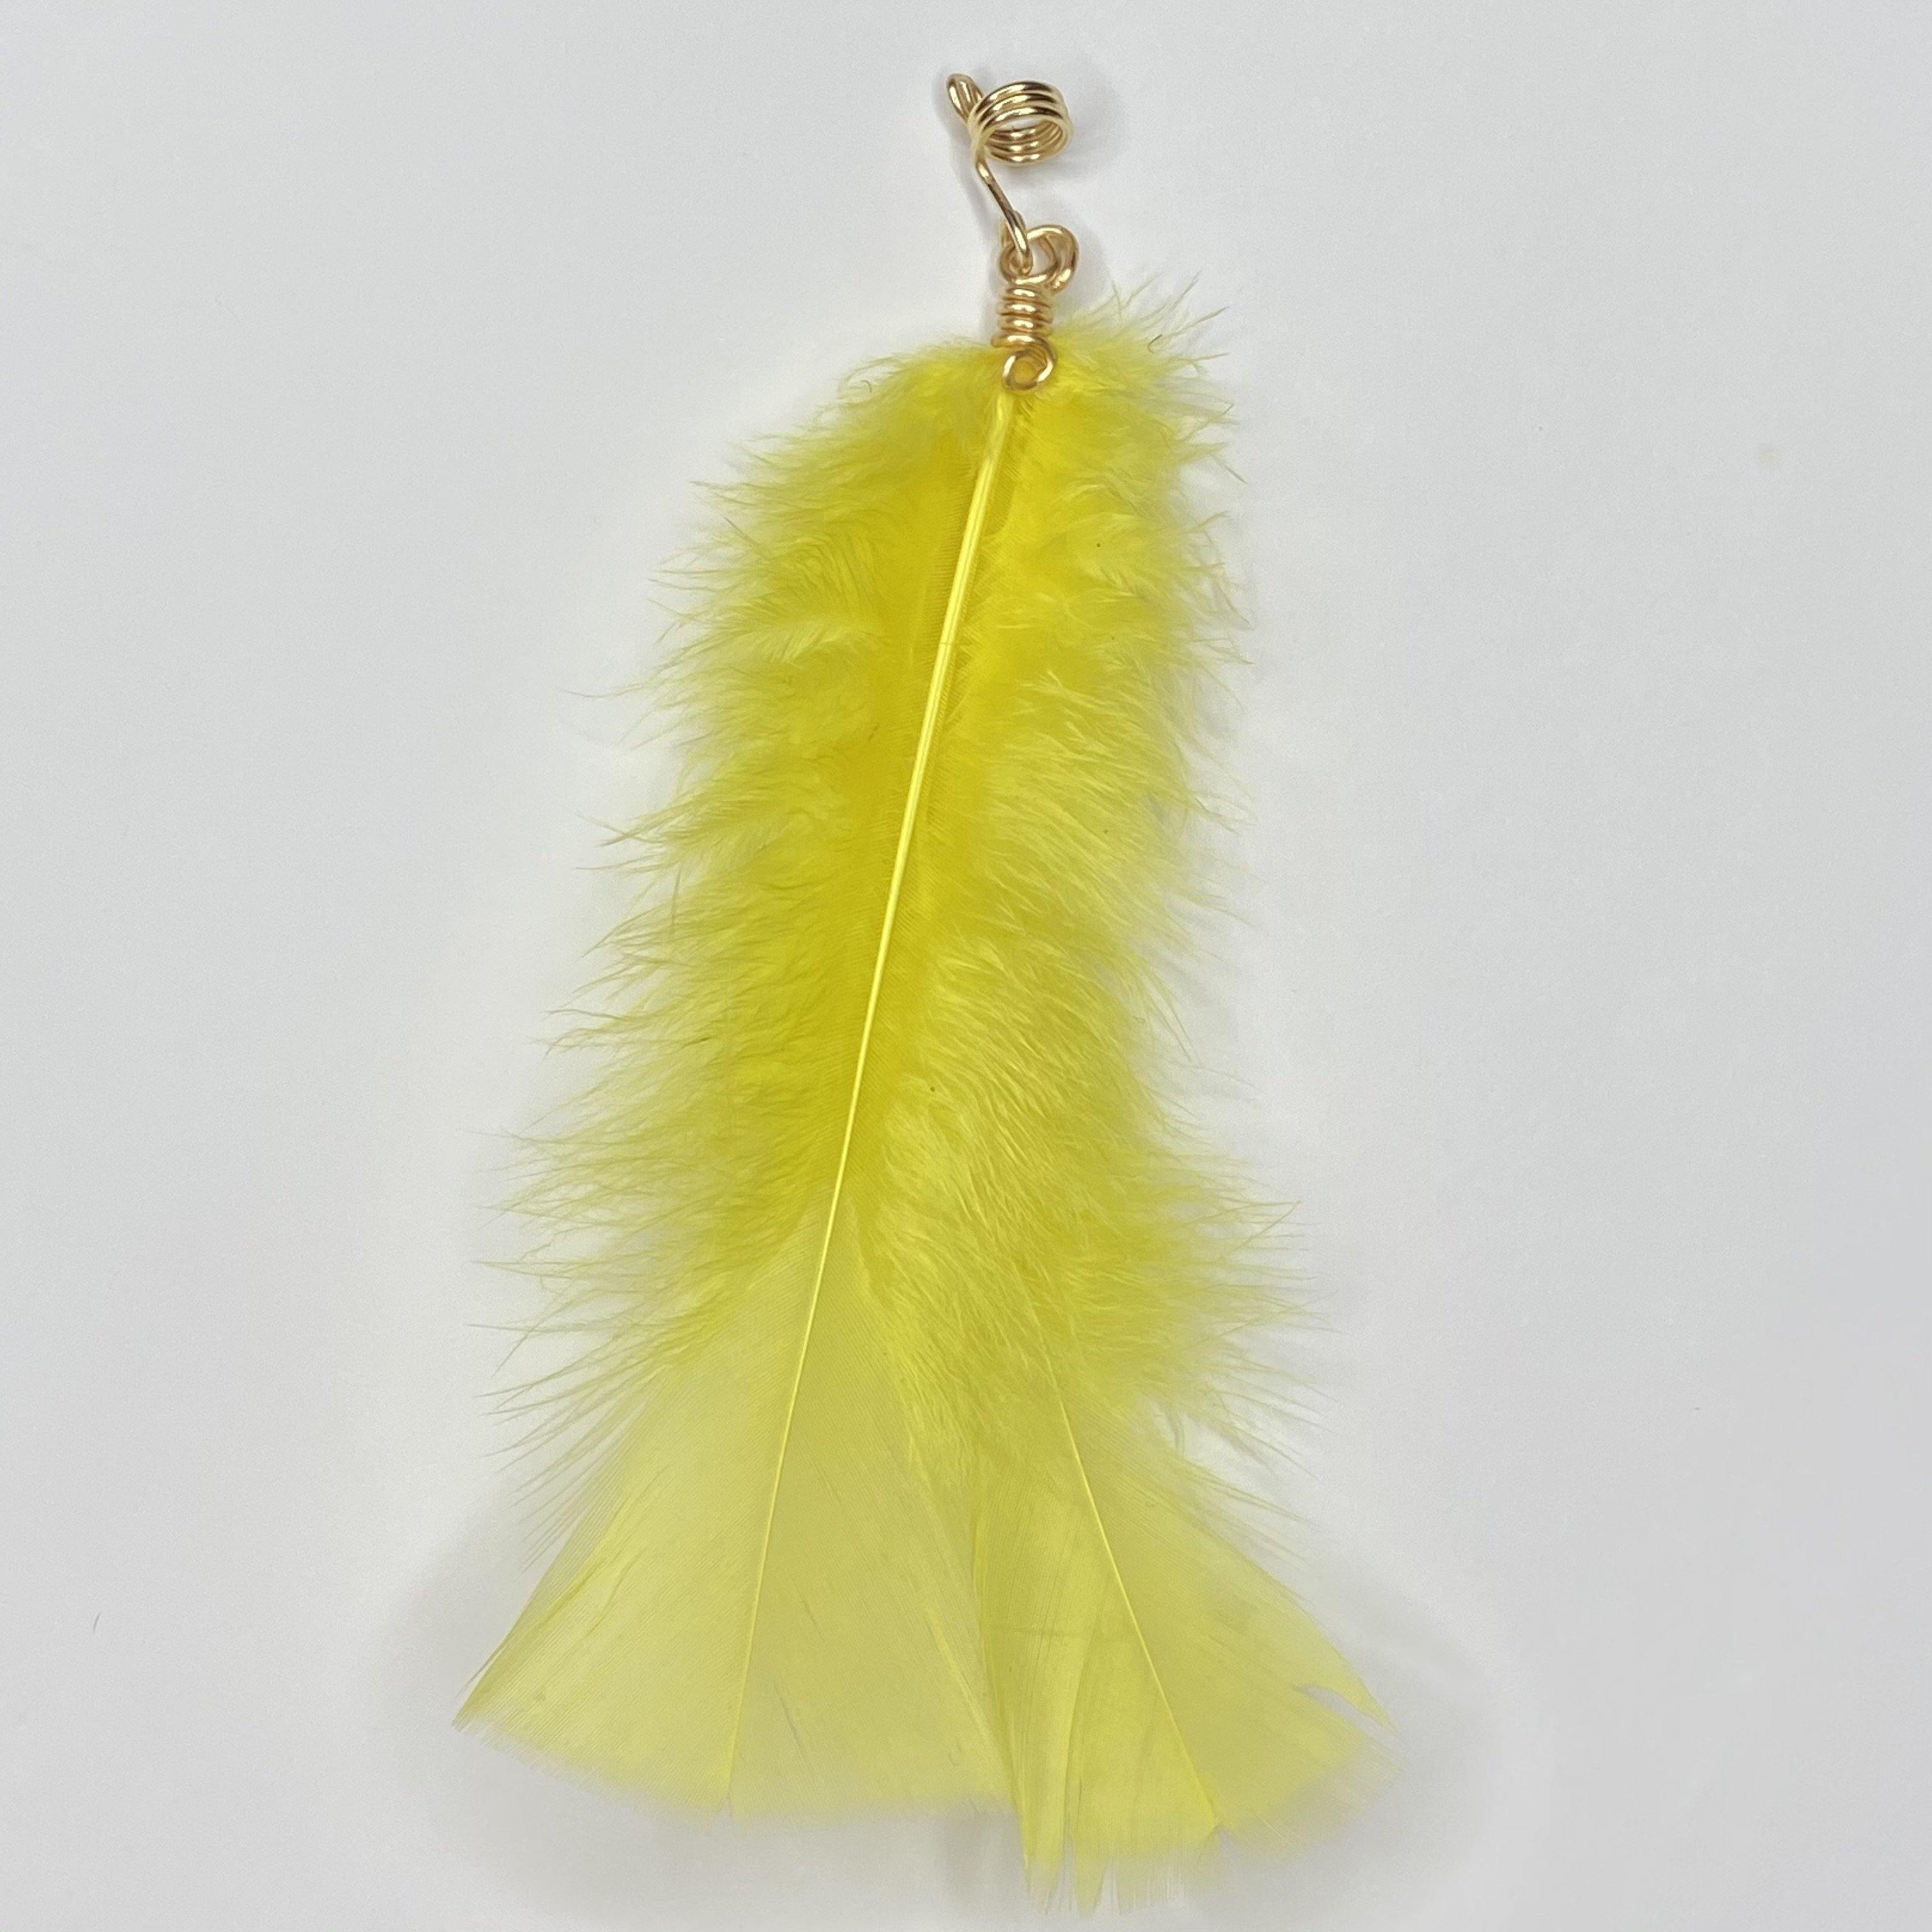 Feather Hair Candy